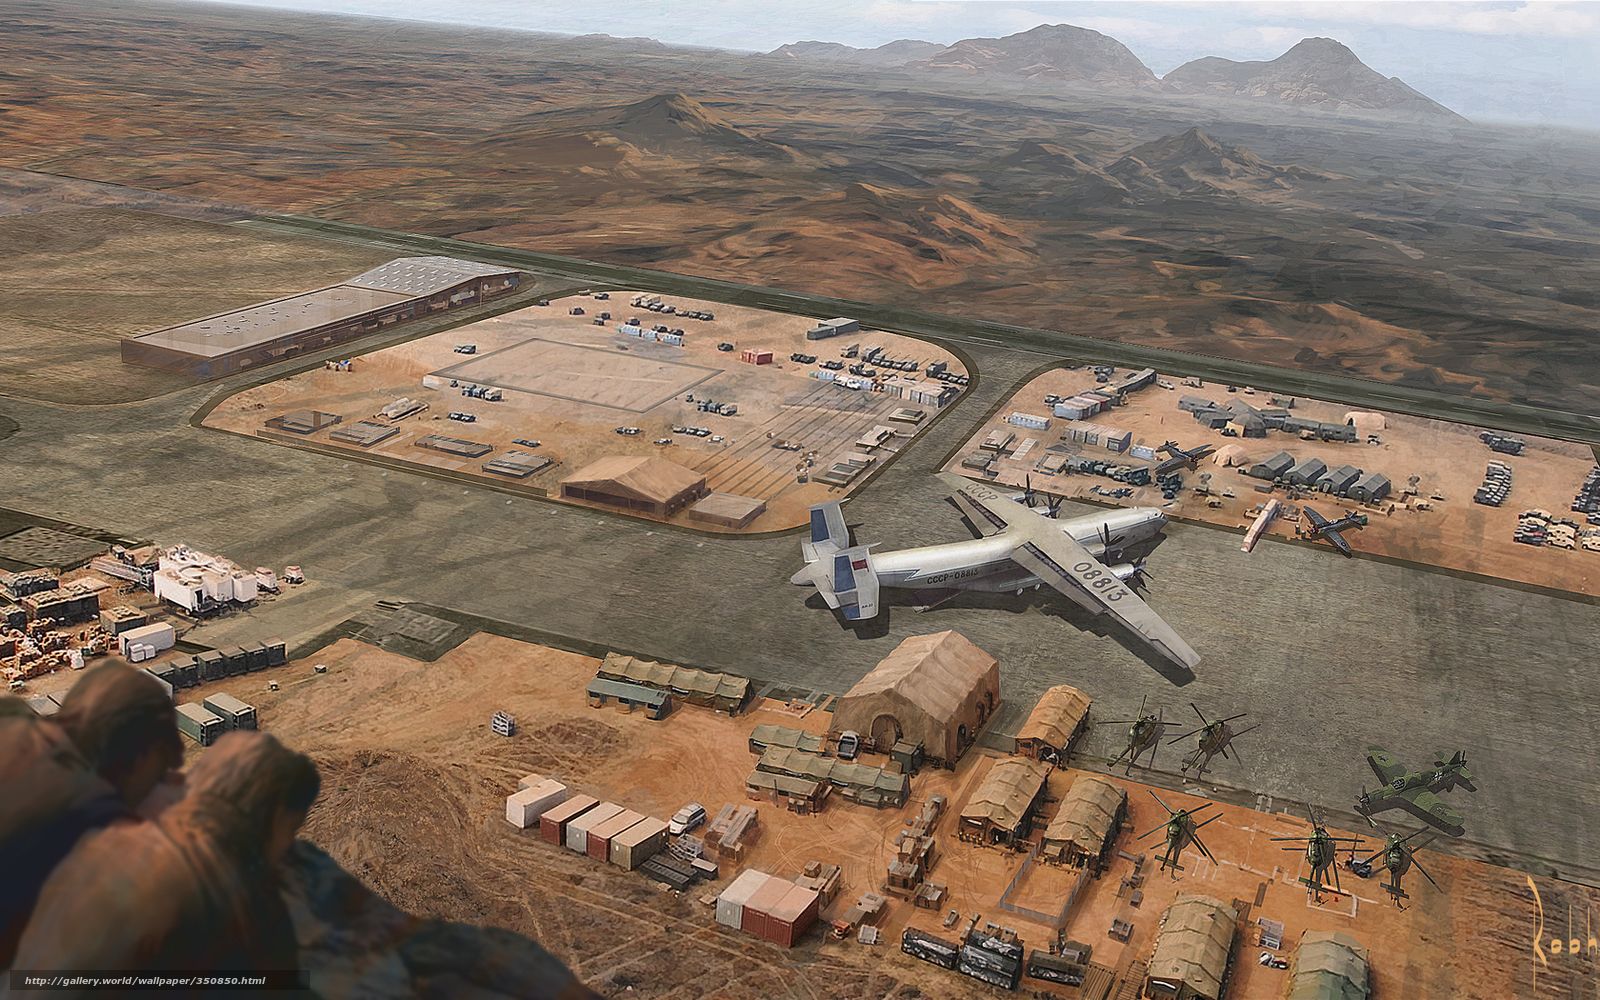 Download wallpaper military base, aircraft, helicopters, desert